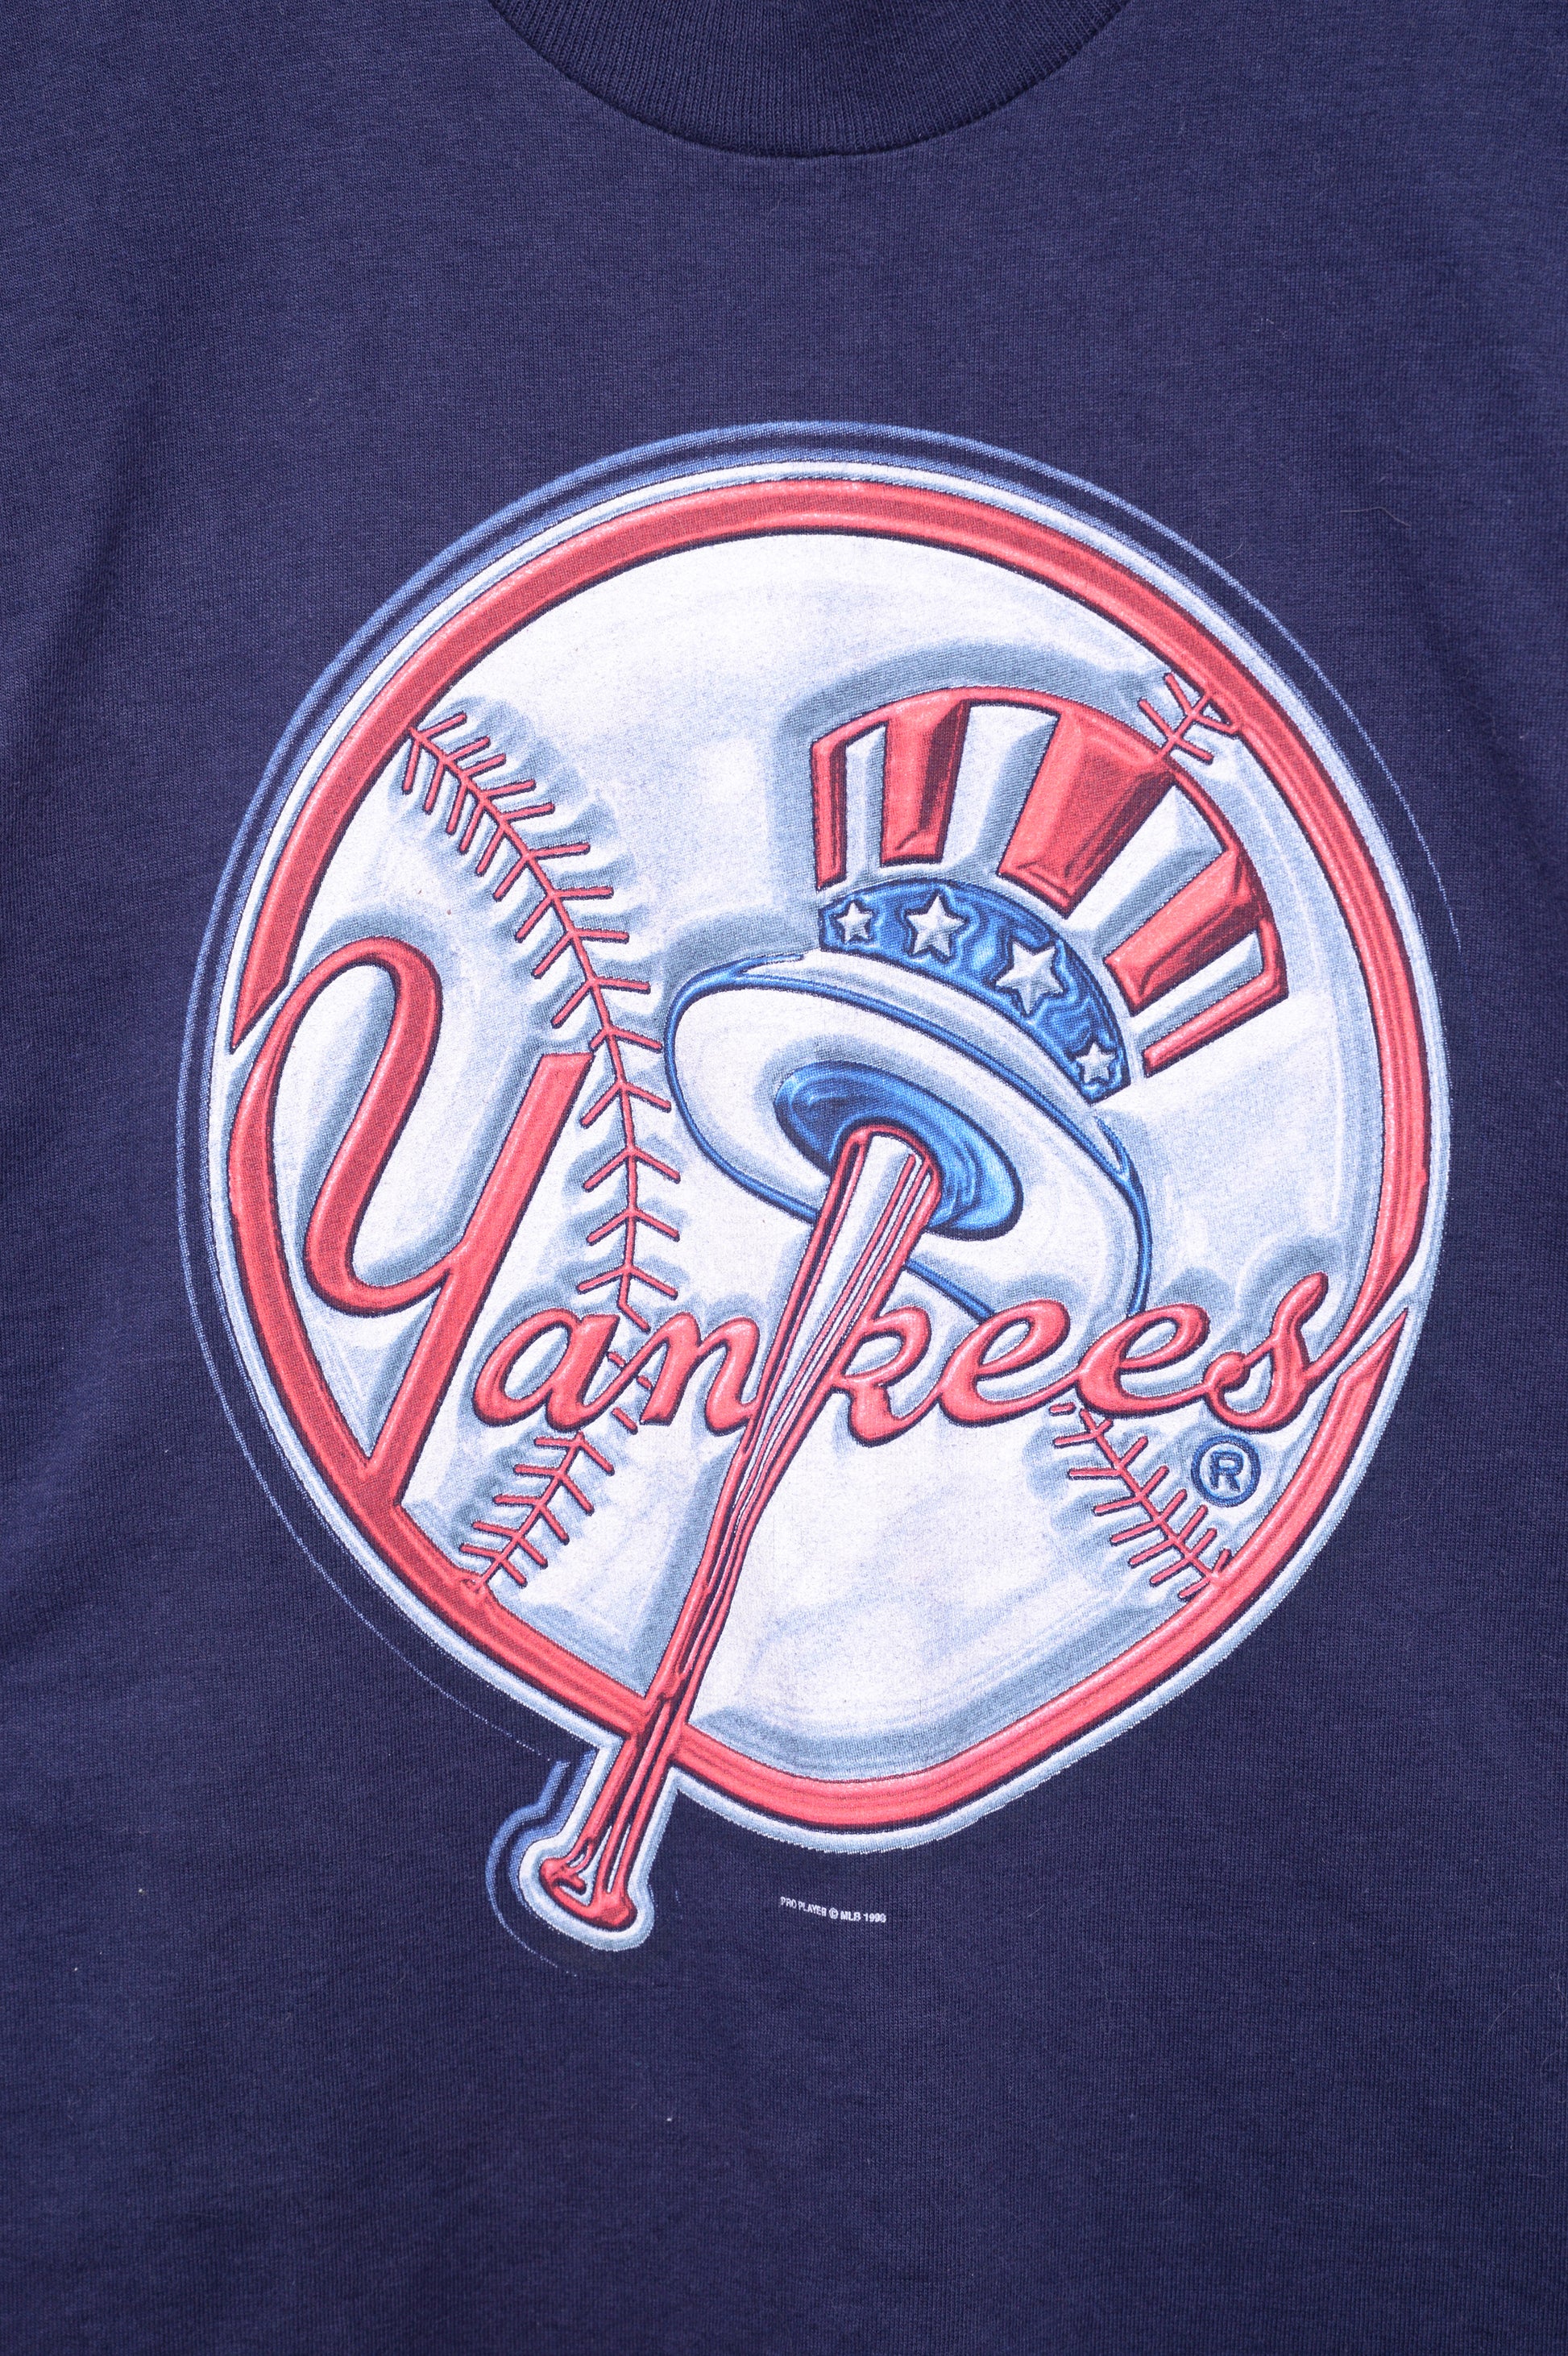 New York Yankees Tee Free Shipping - The Vintage Twin